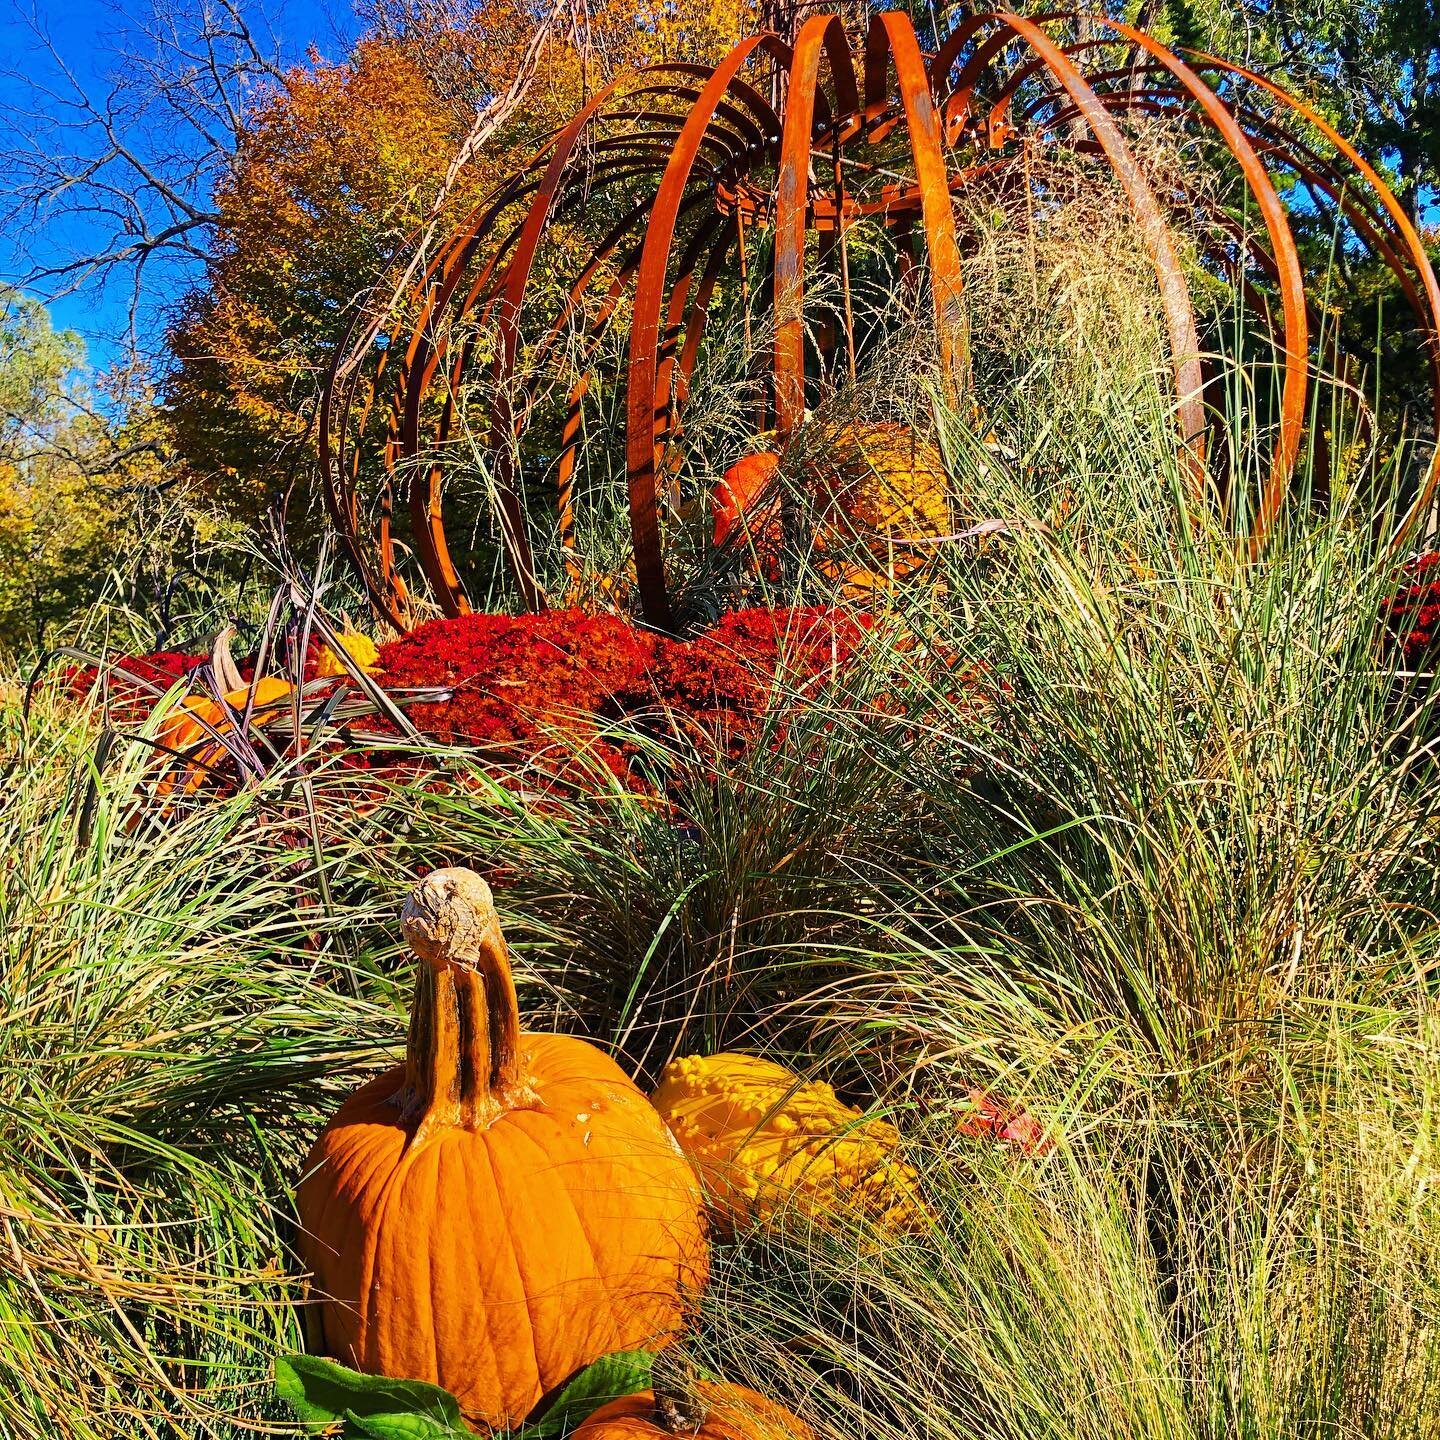 MoBot still looking fabulous in the fall! Where have you been safely getting out and about?